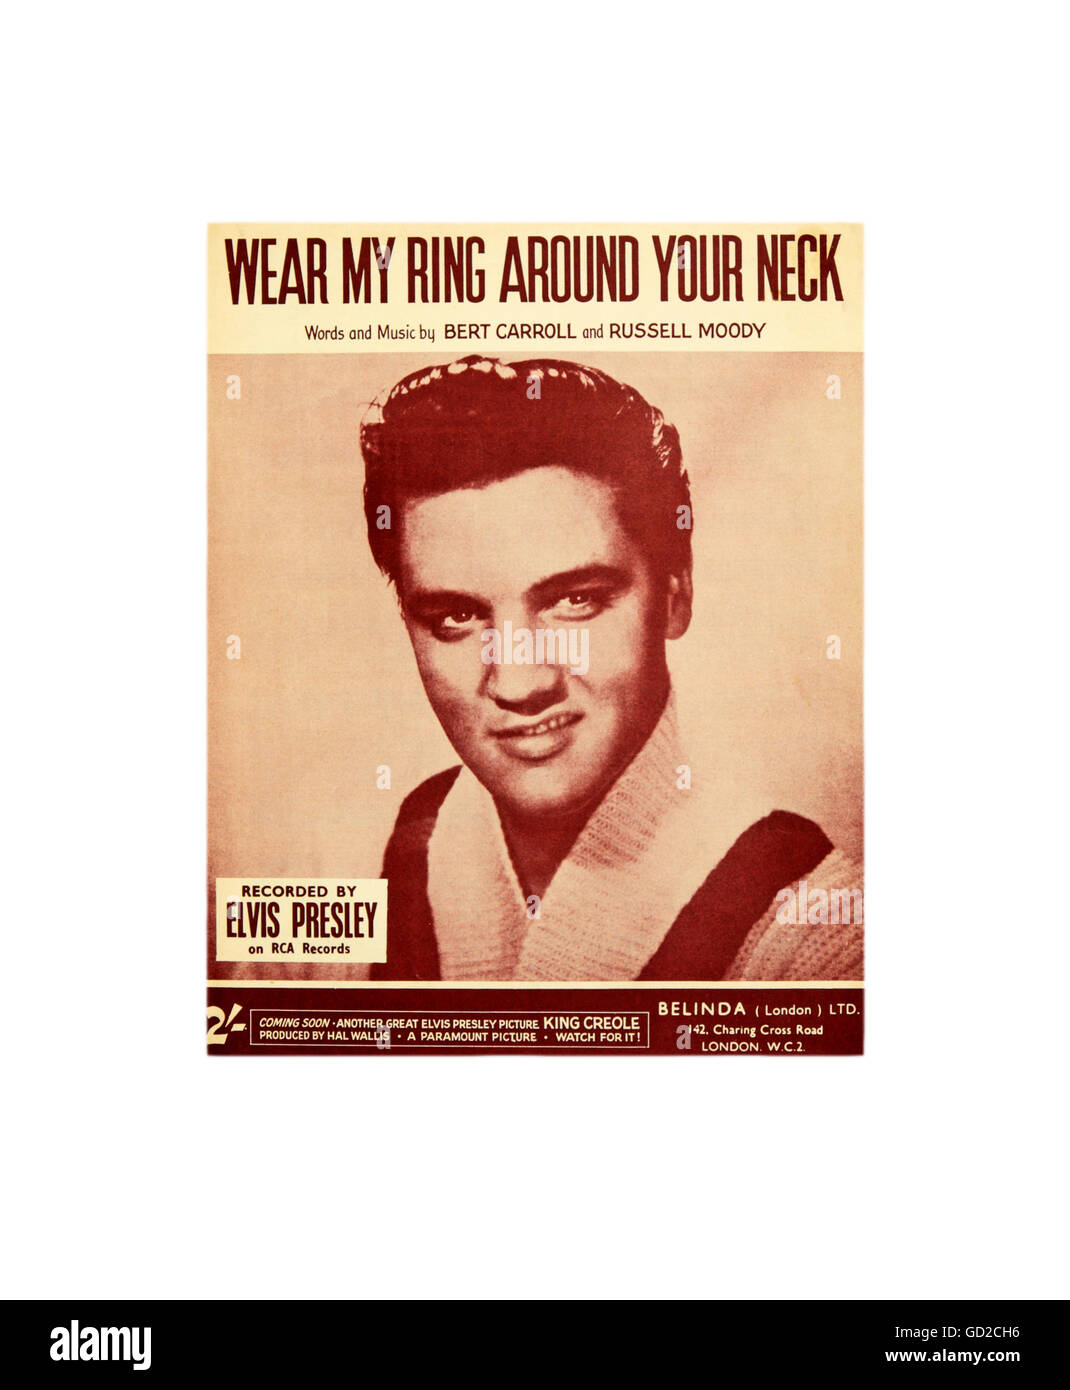 Wear My Ring Around your Neck sheet music cover by Elvis Presley Stock  Photo - Alamy